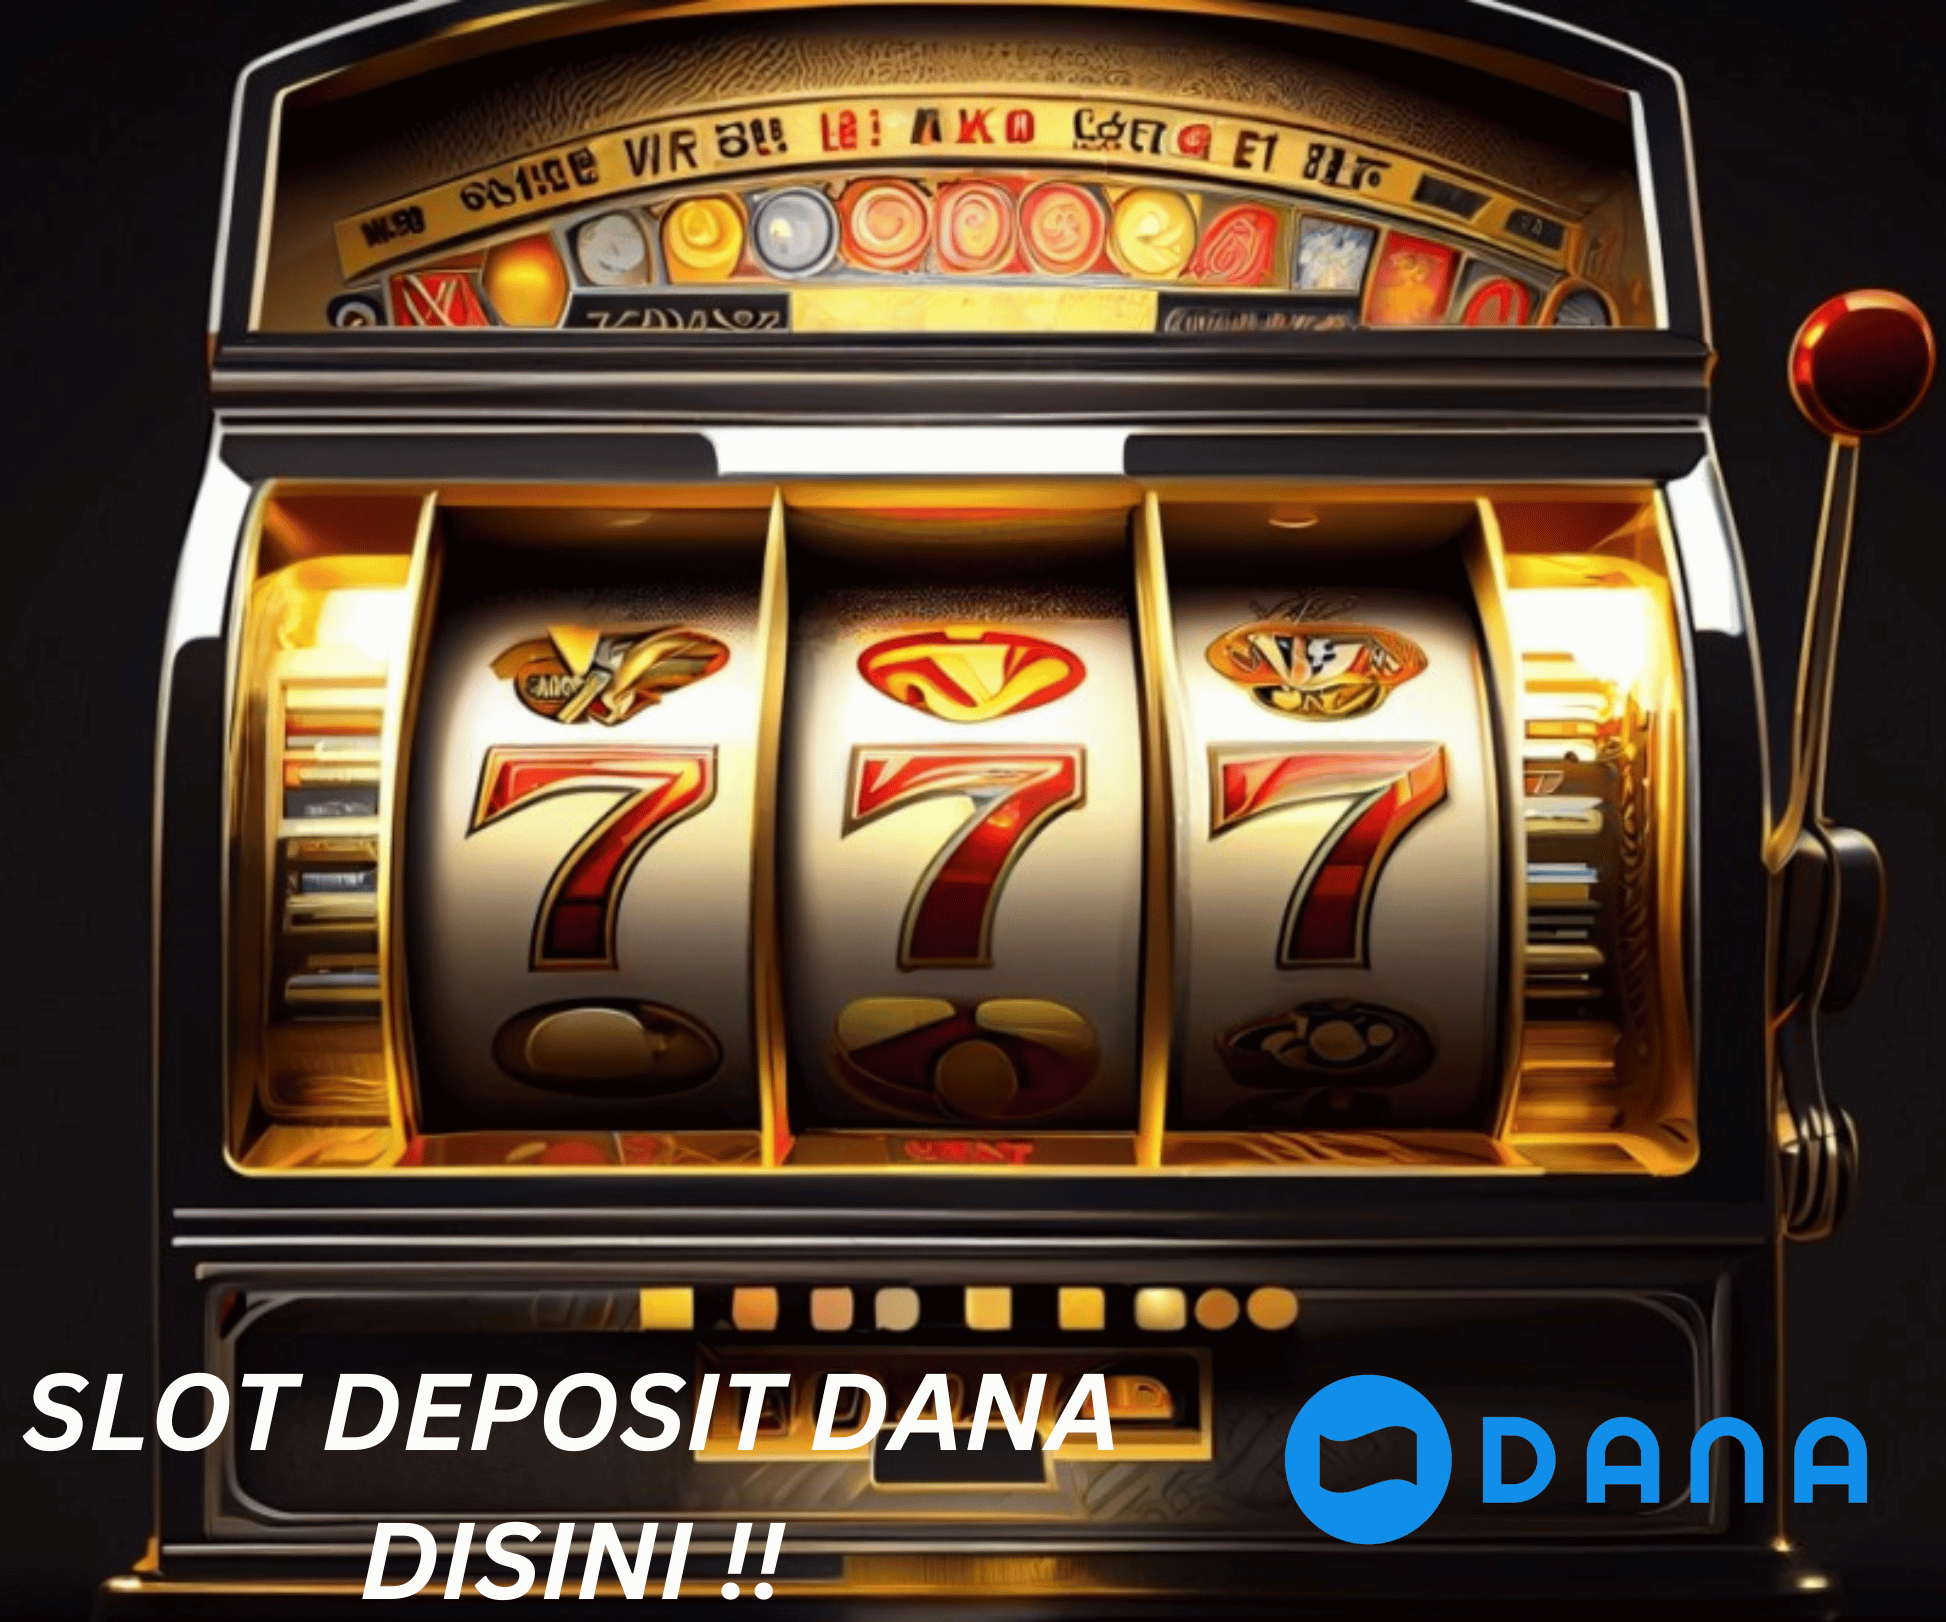 Find out the best "SLOT DANA" site for playing online gambling